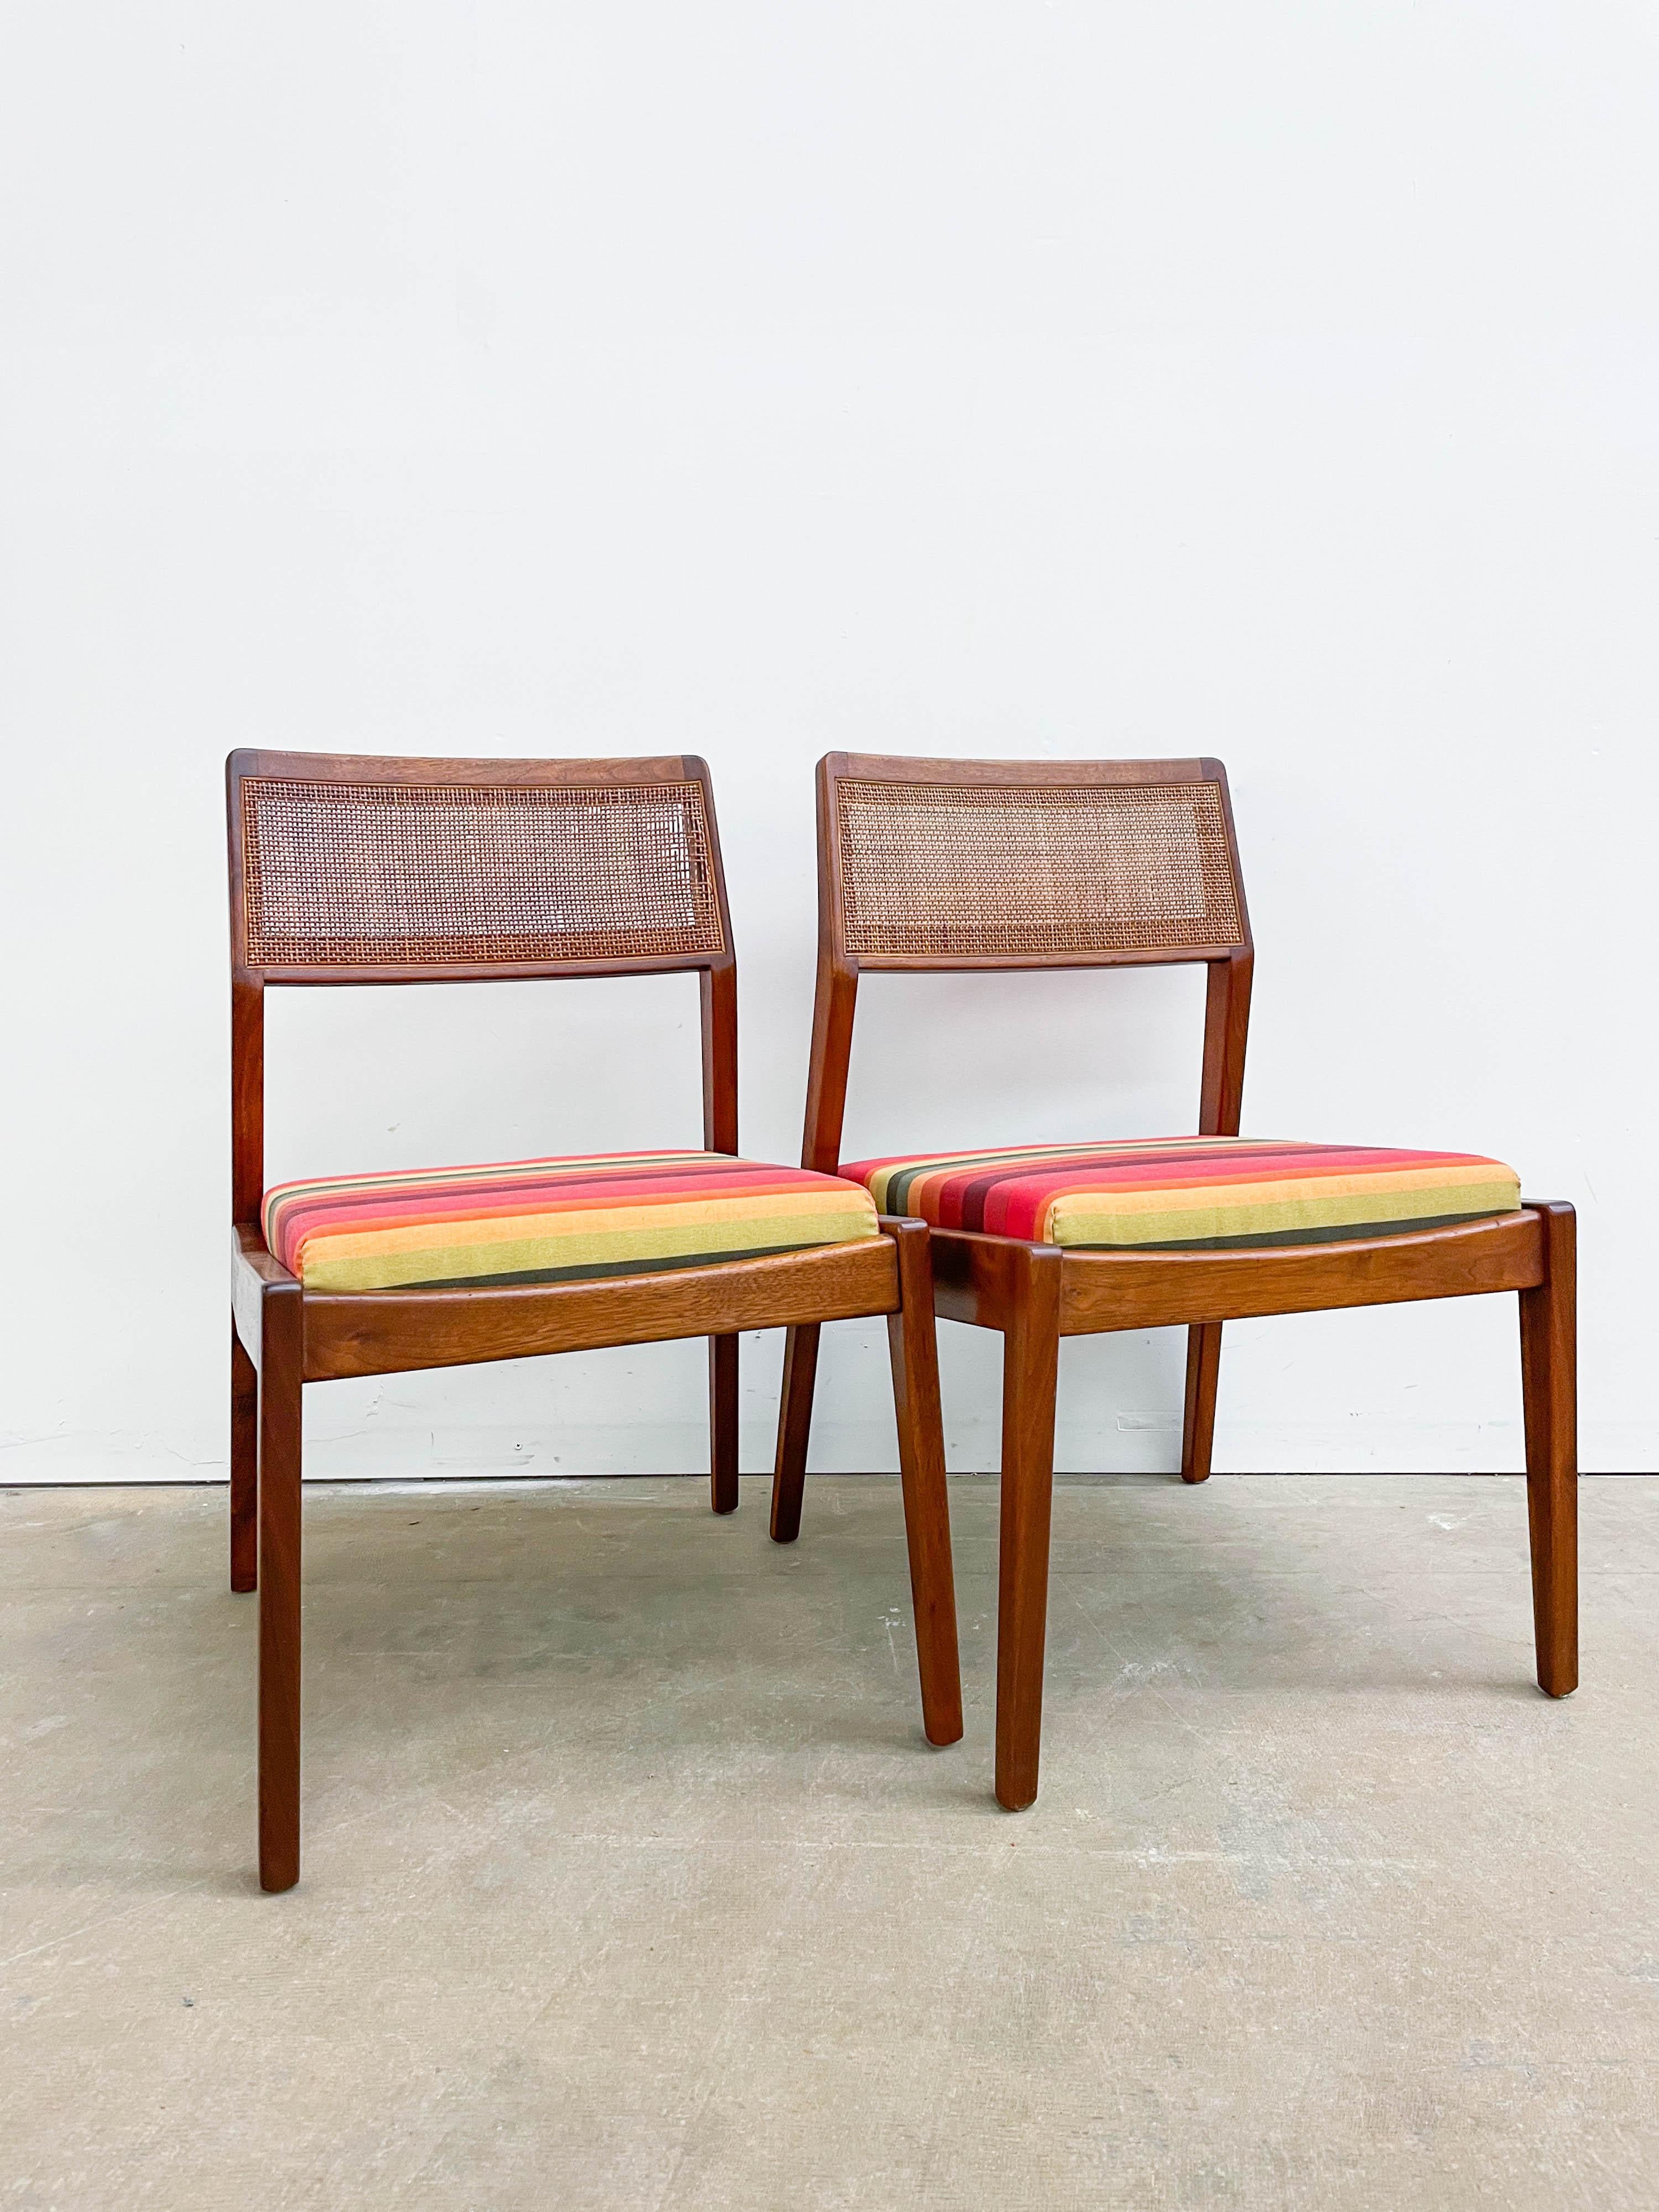 A pair of solid walnut side chairs designed by Jens Risom in the 1950s. The original cane backs add a nice texture and lightness to the design. Newly upholstered in a rainbow fabric with new foam for a durable and comfortable seat. Both chairs are